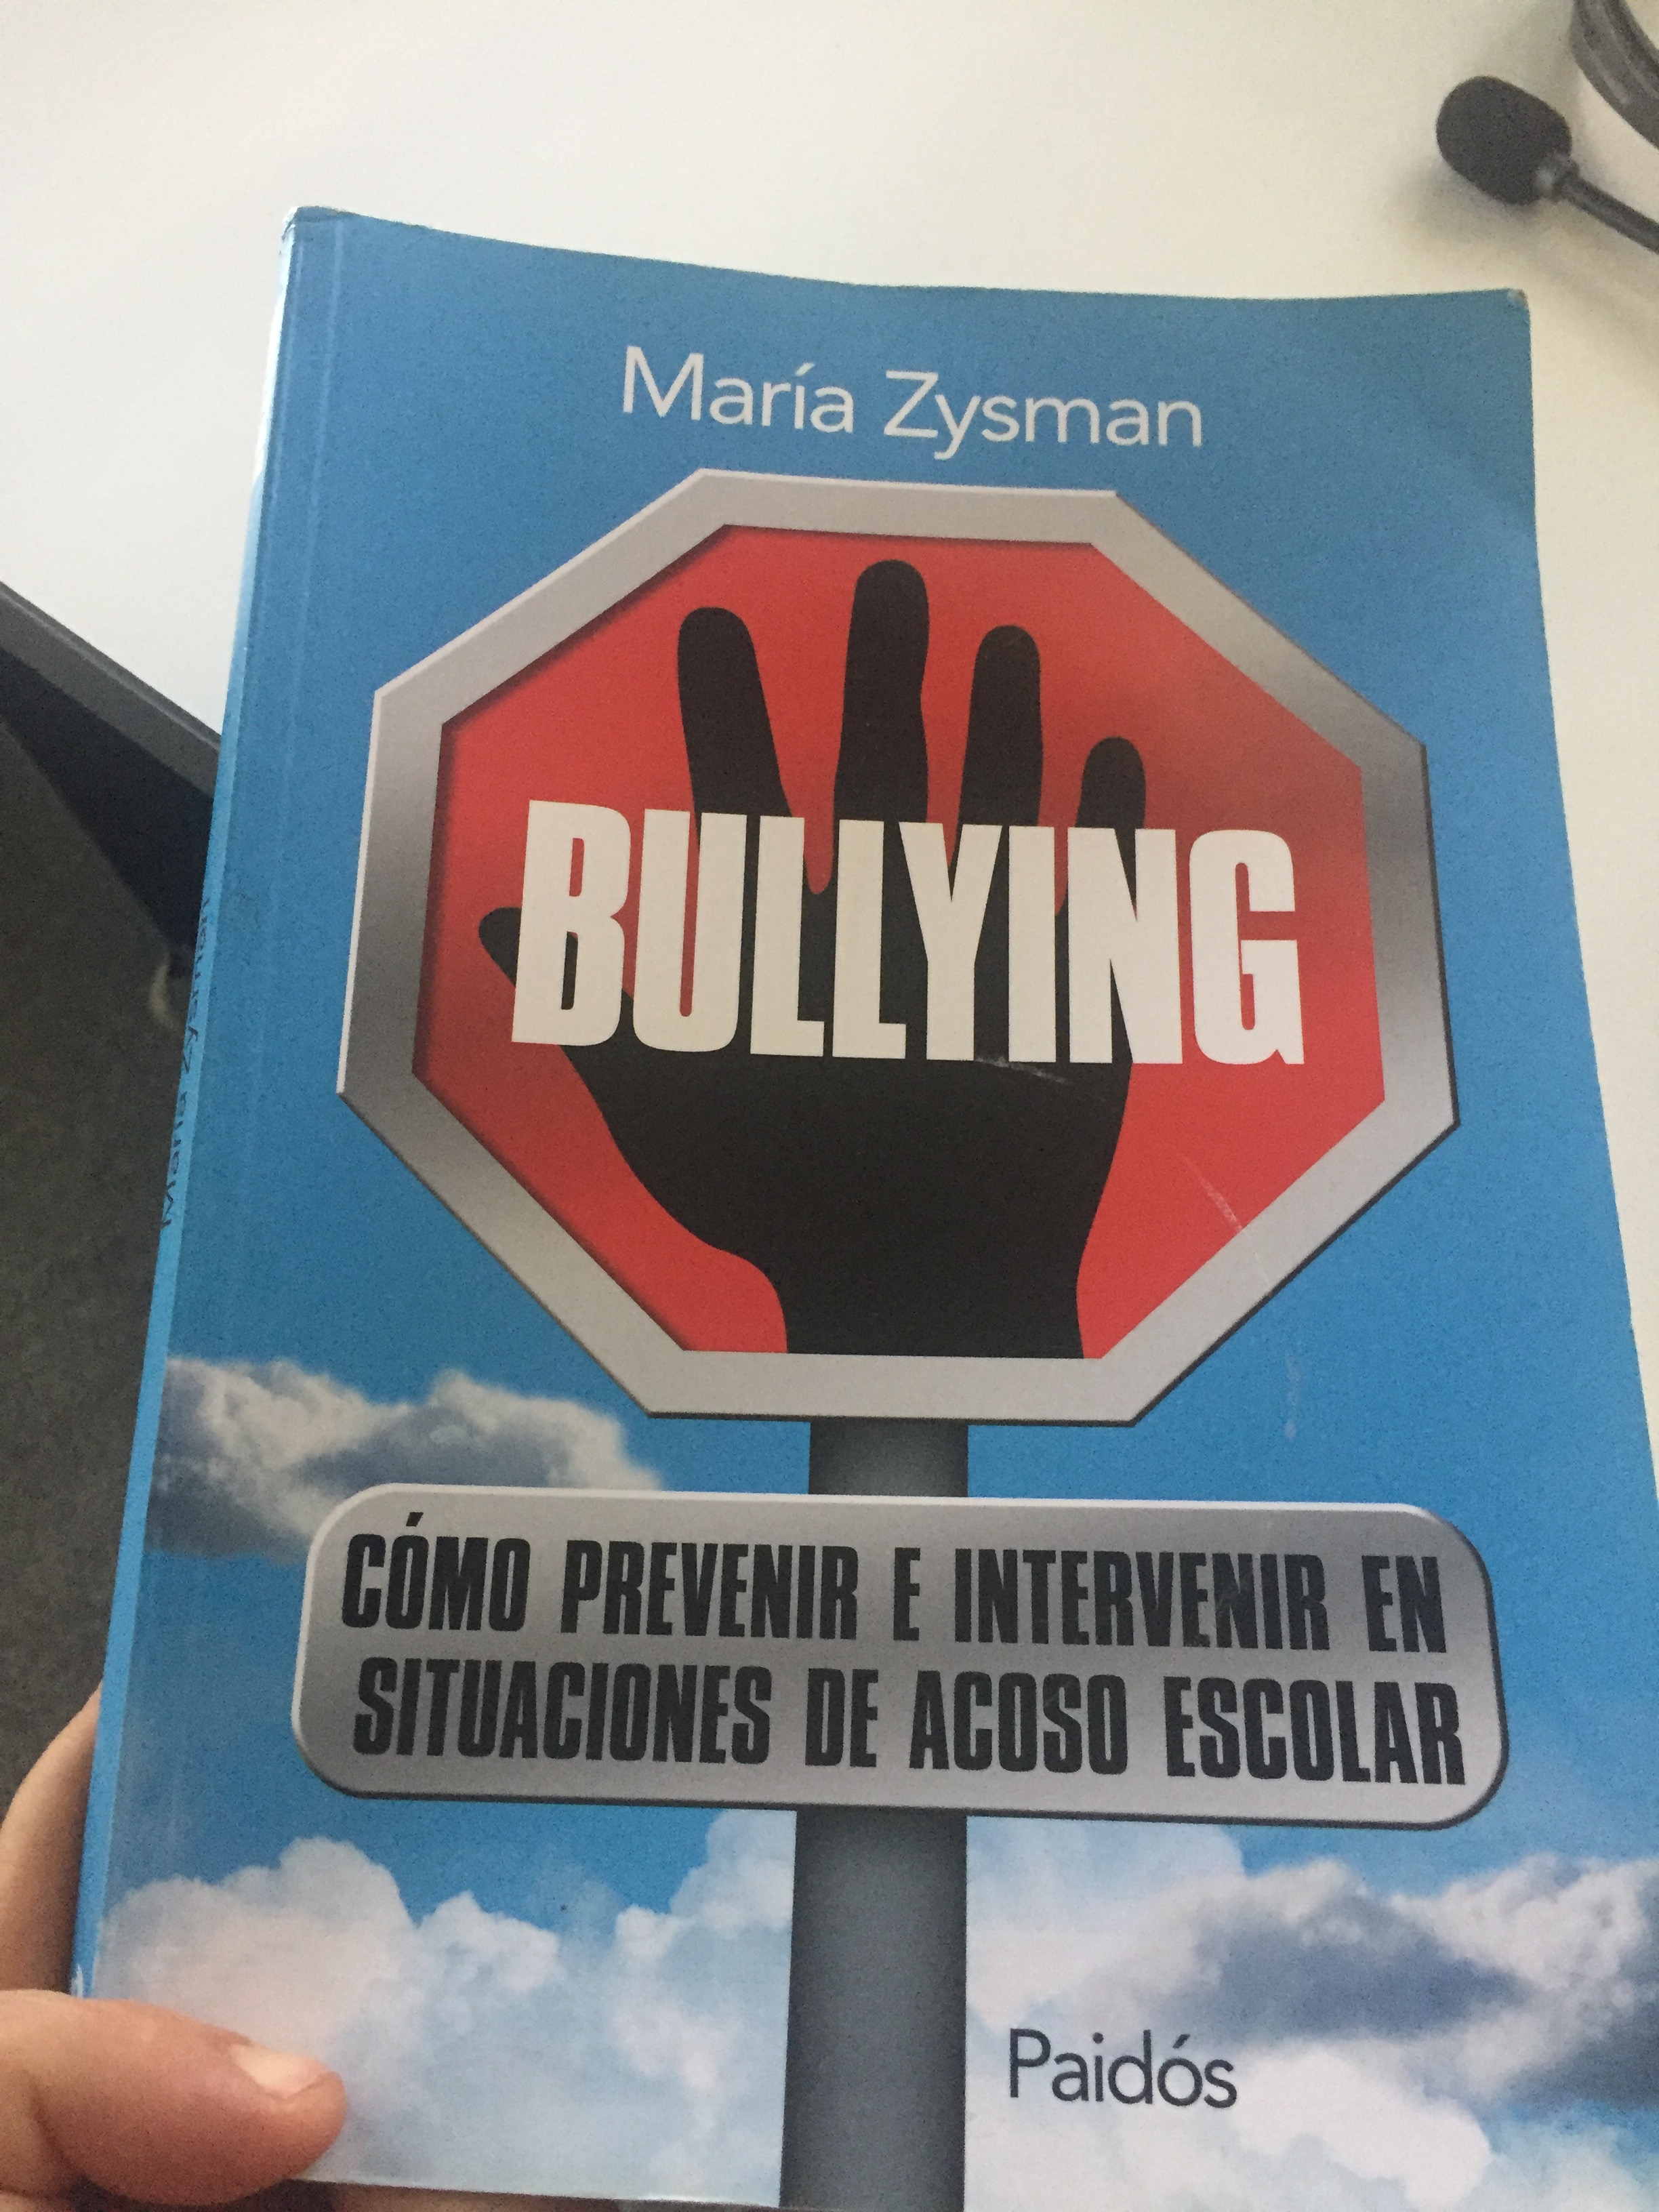 Bullying and non-bullying behaviours